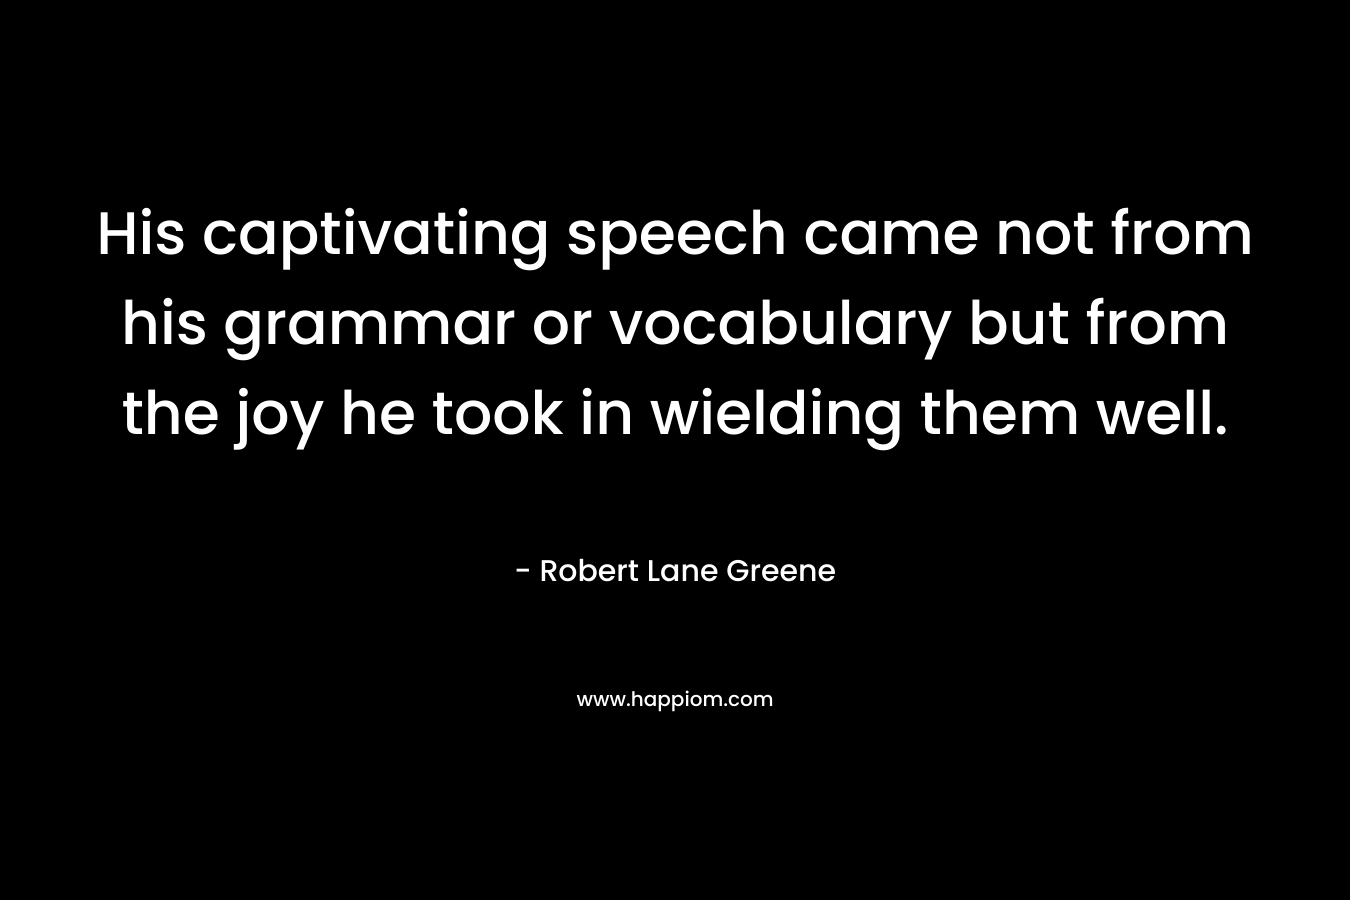 His captivating speech came not from his grammar or vocabulary but from the joy he took in wielding them well. – Robert Lane Greene